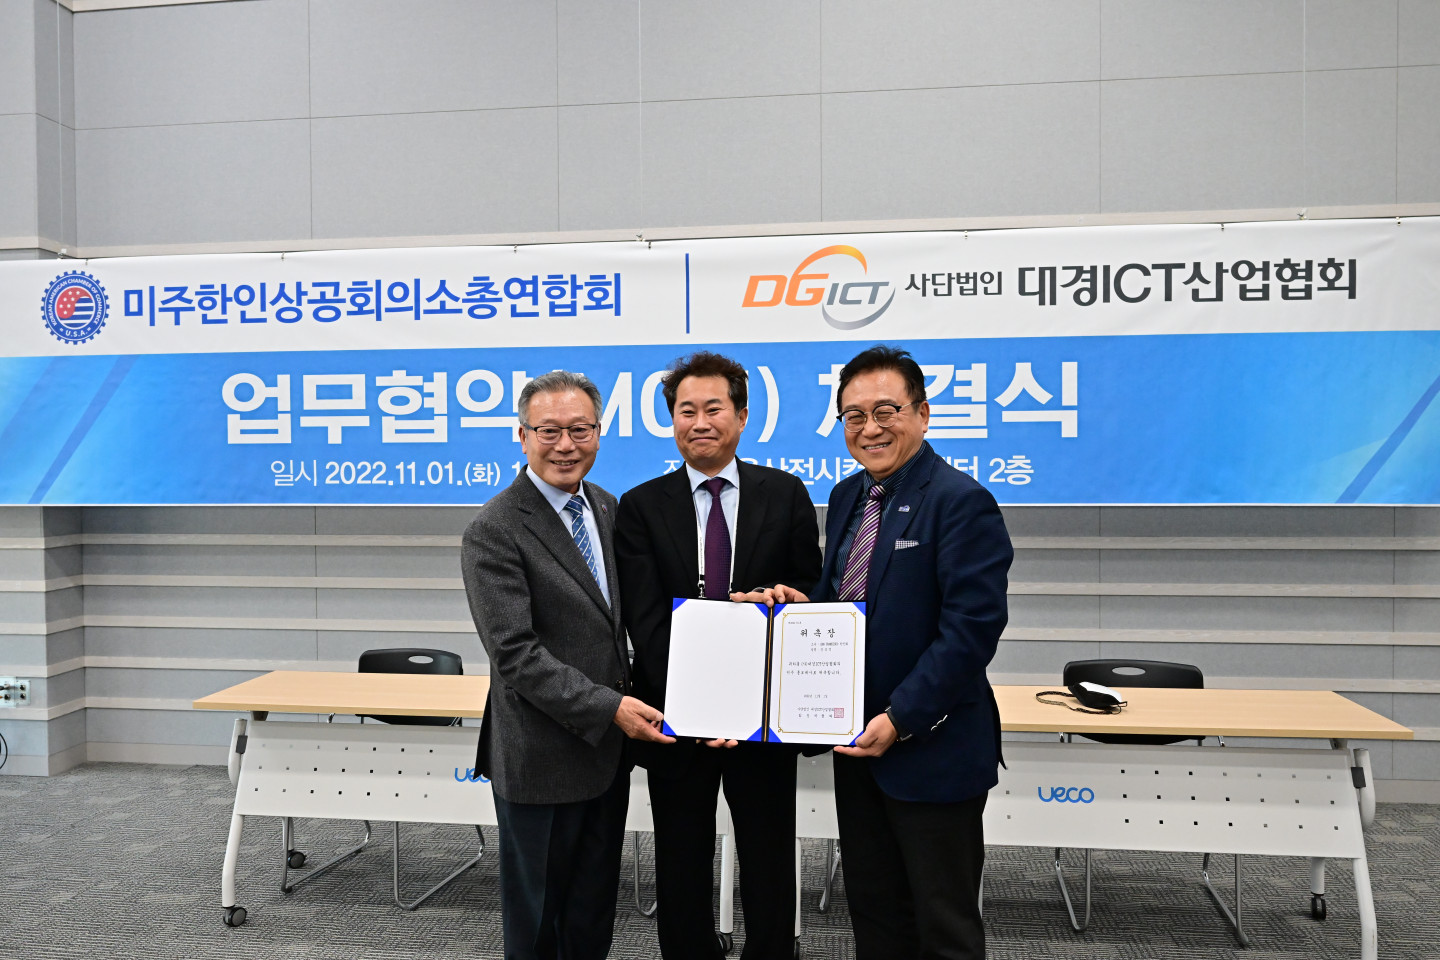 MOU signing ceremony between the Korean American Chamber of Commerce USA and the Daegyeong ICT Industry Association